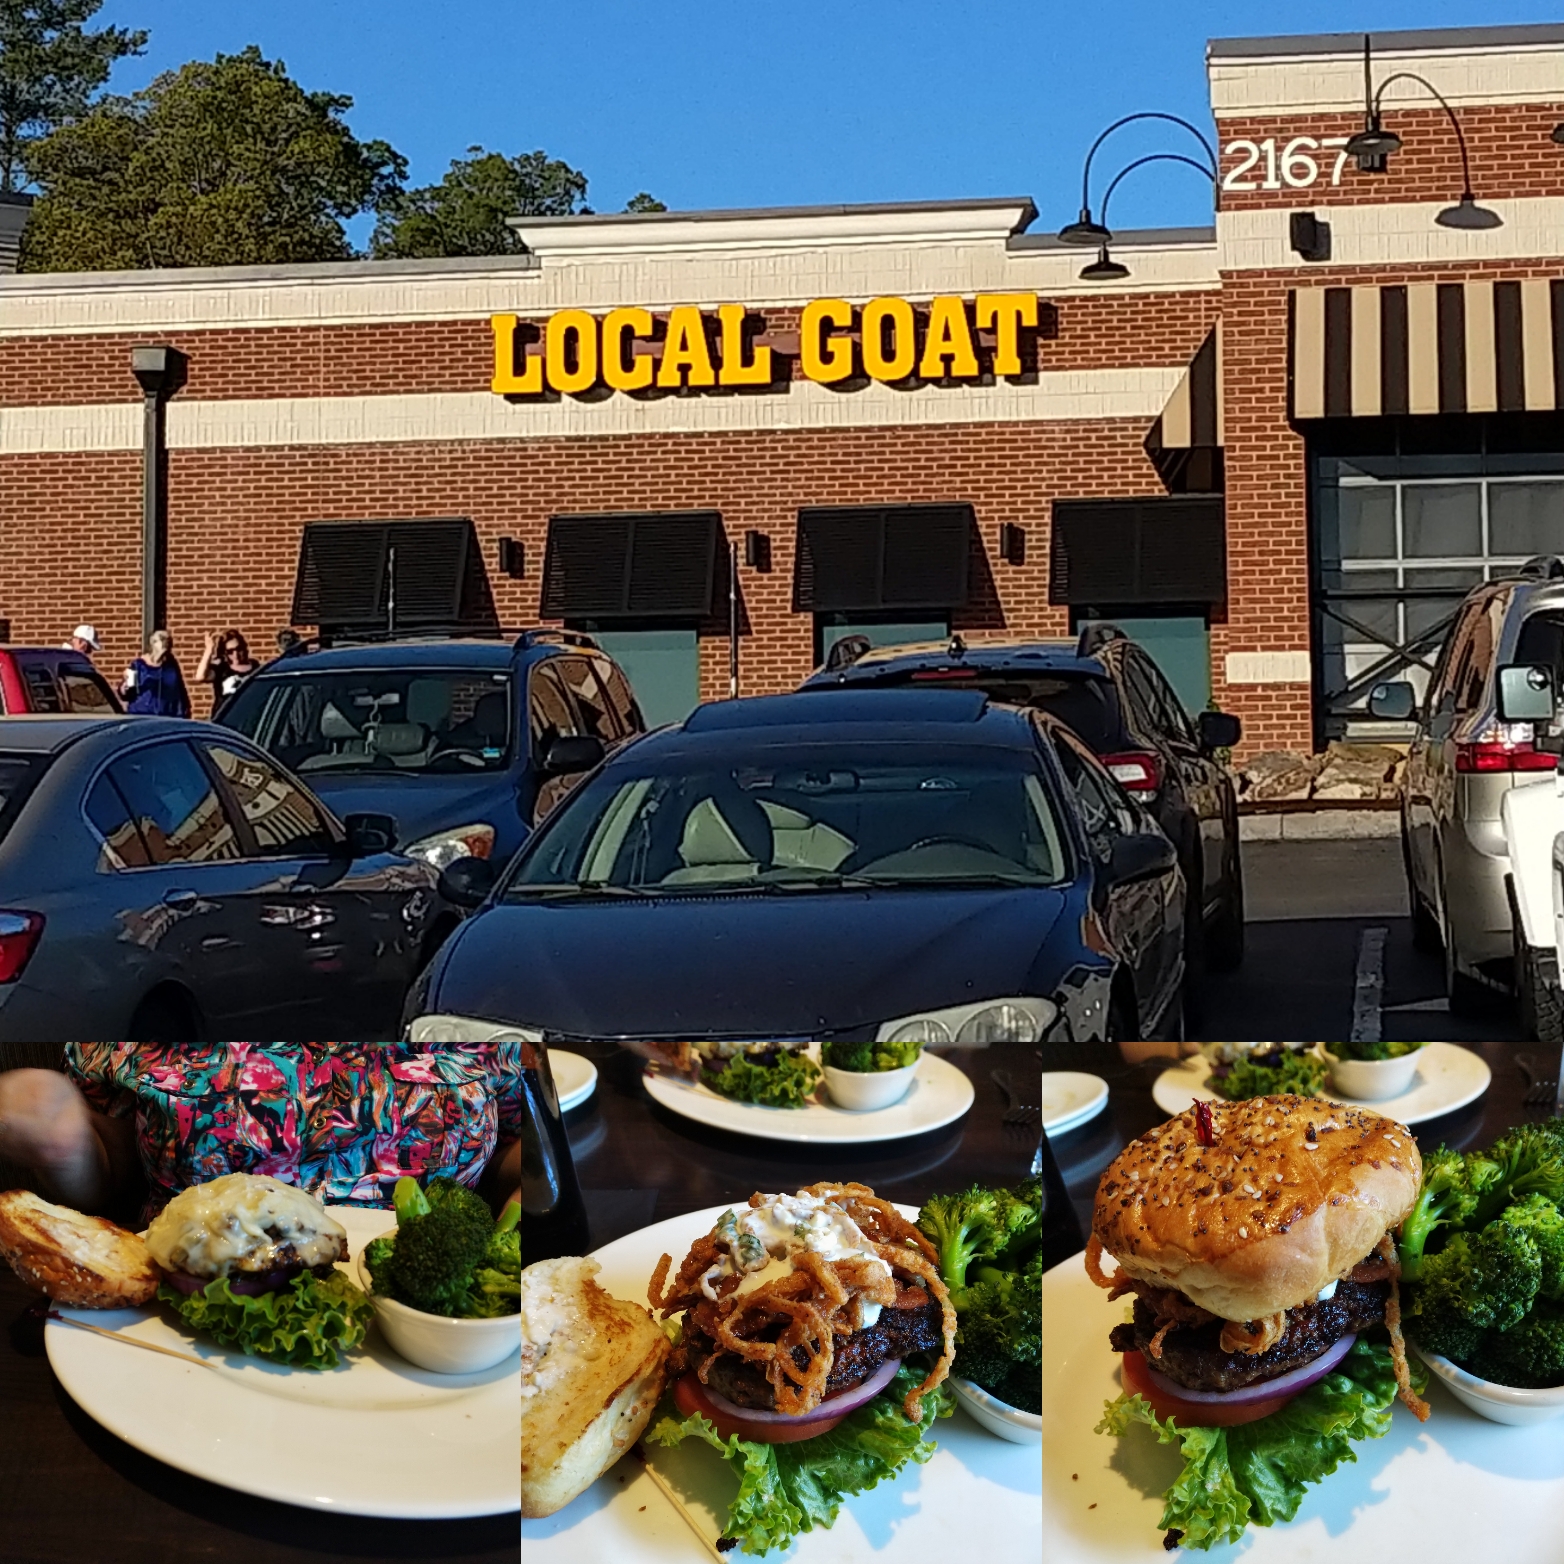 Local Goat - New American Restaurant Pigeon Forge